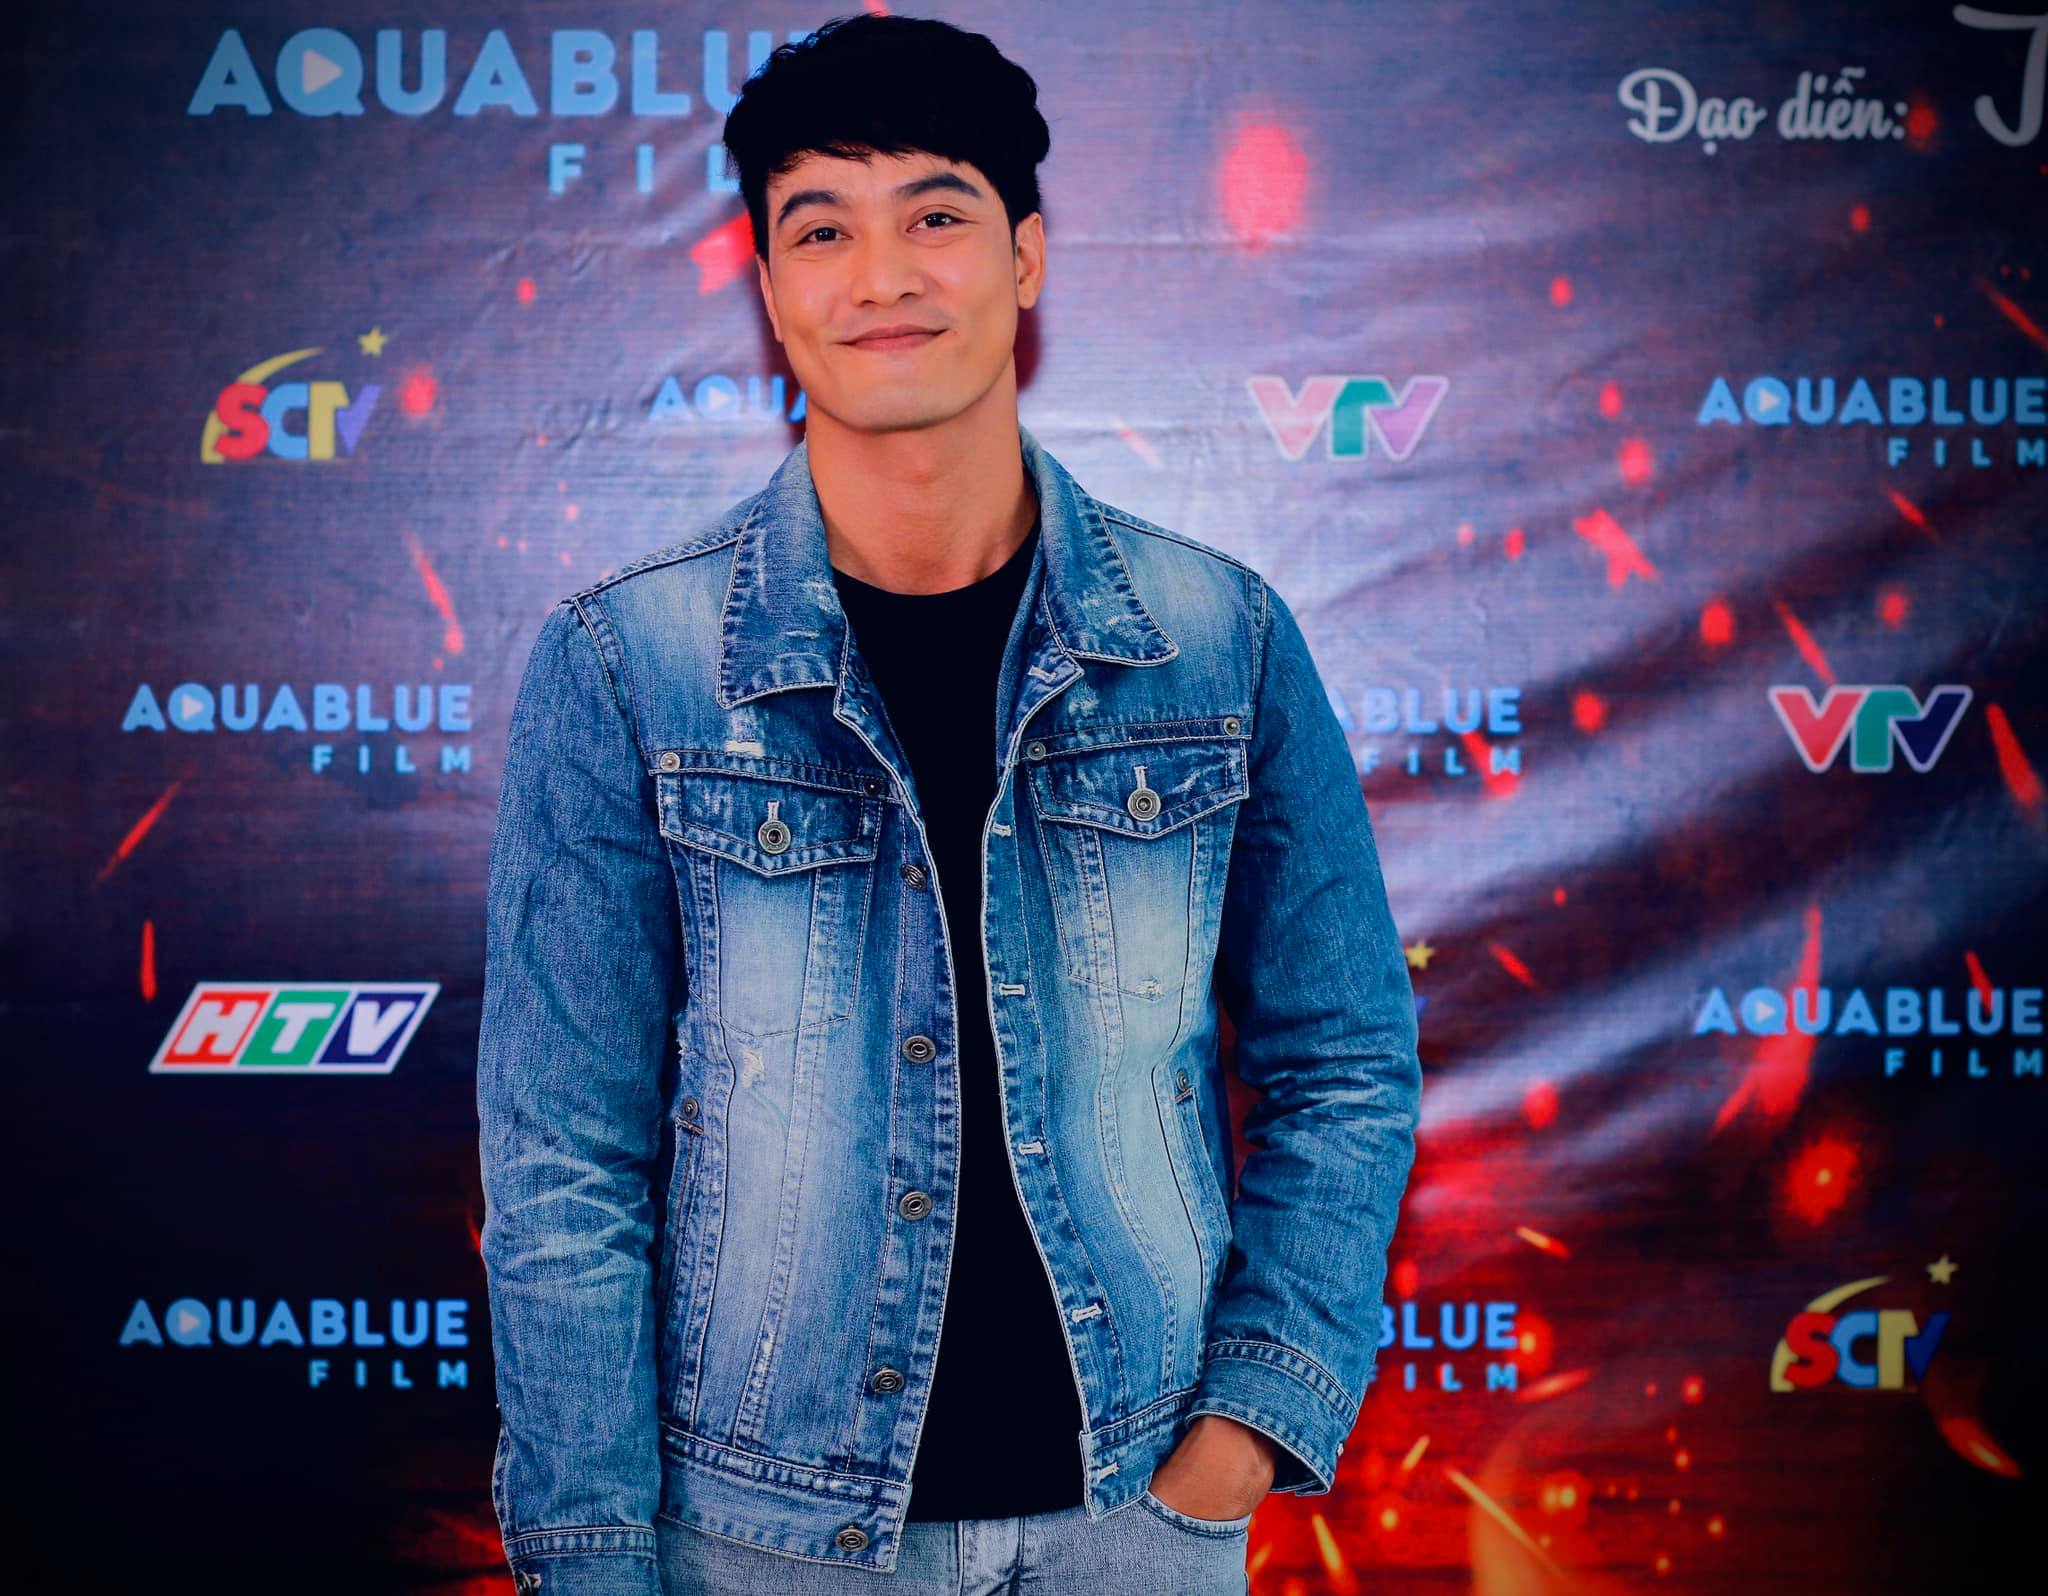  Image of actor Ngo Thanh Ta at an event